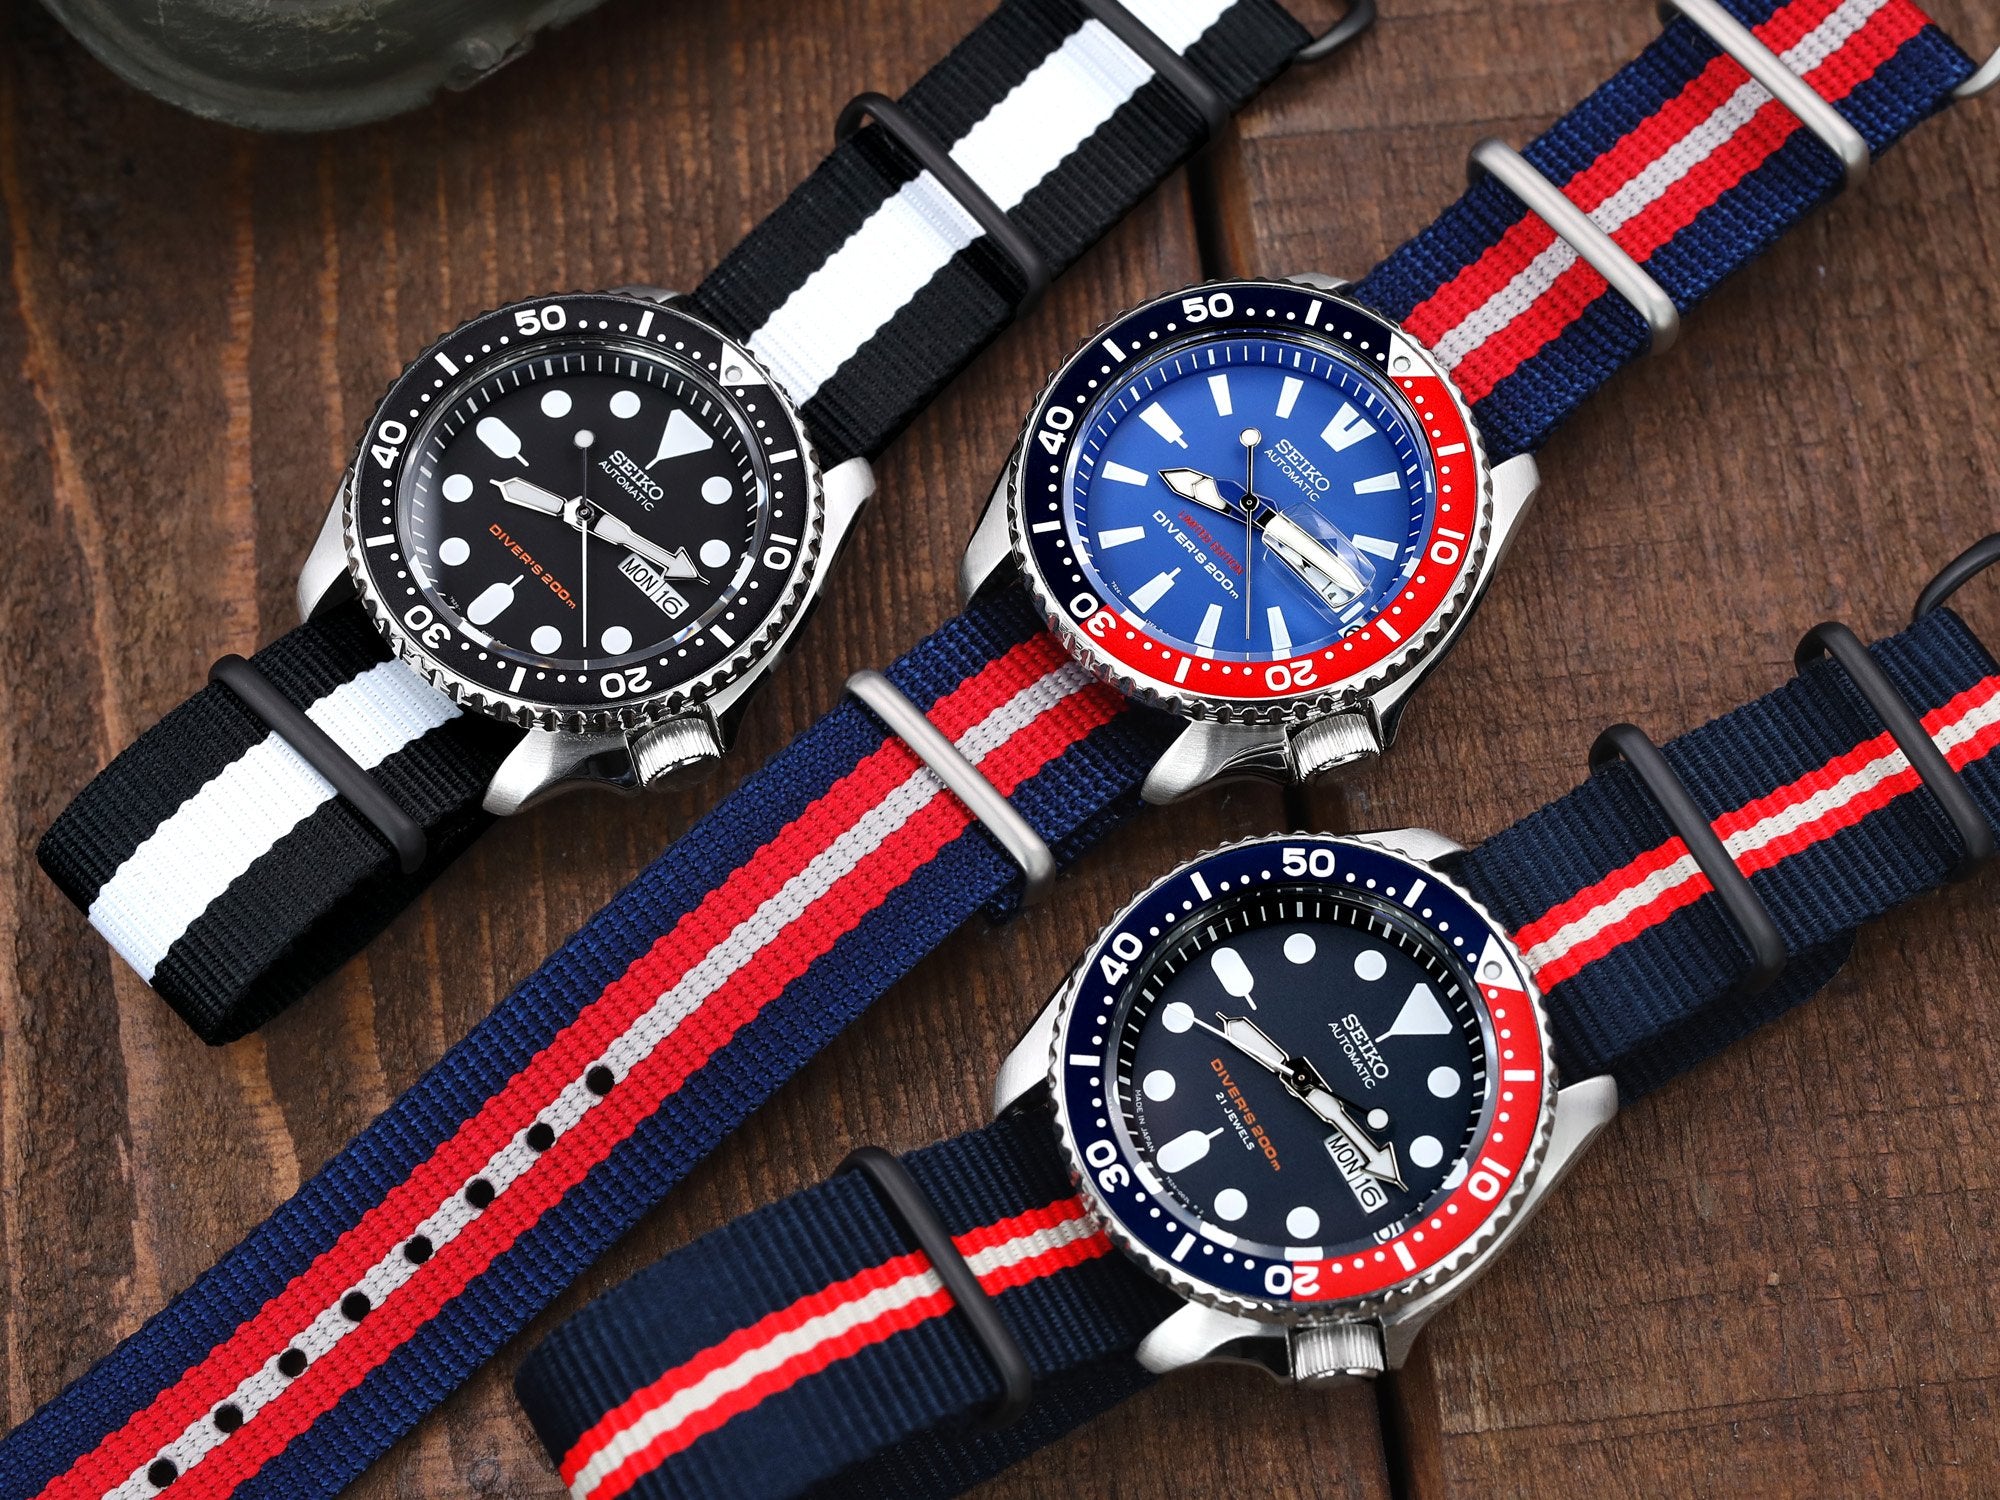 Upgrade Your Seiko to last for eternity - One Seiko Fits All Occasions ...